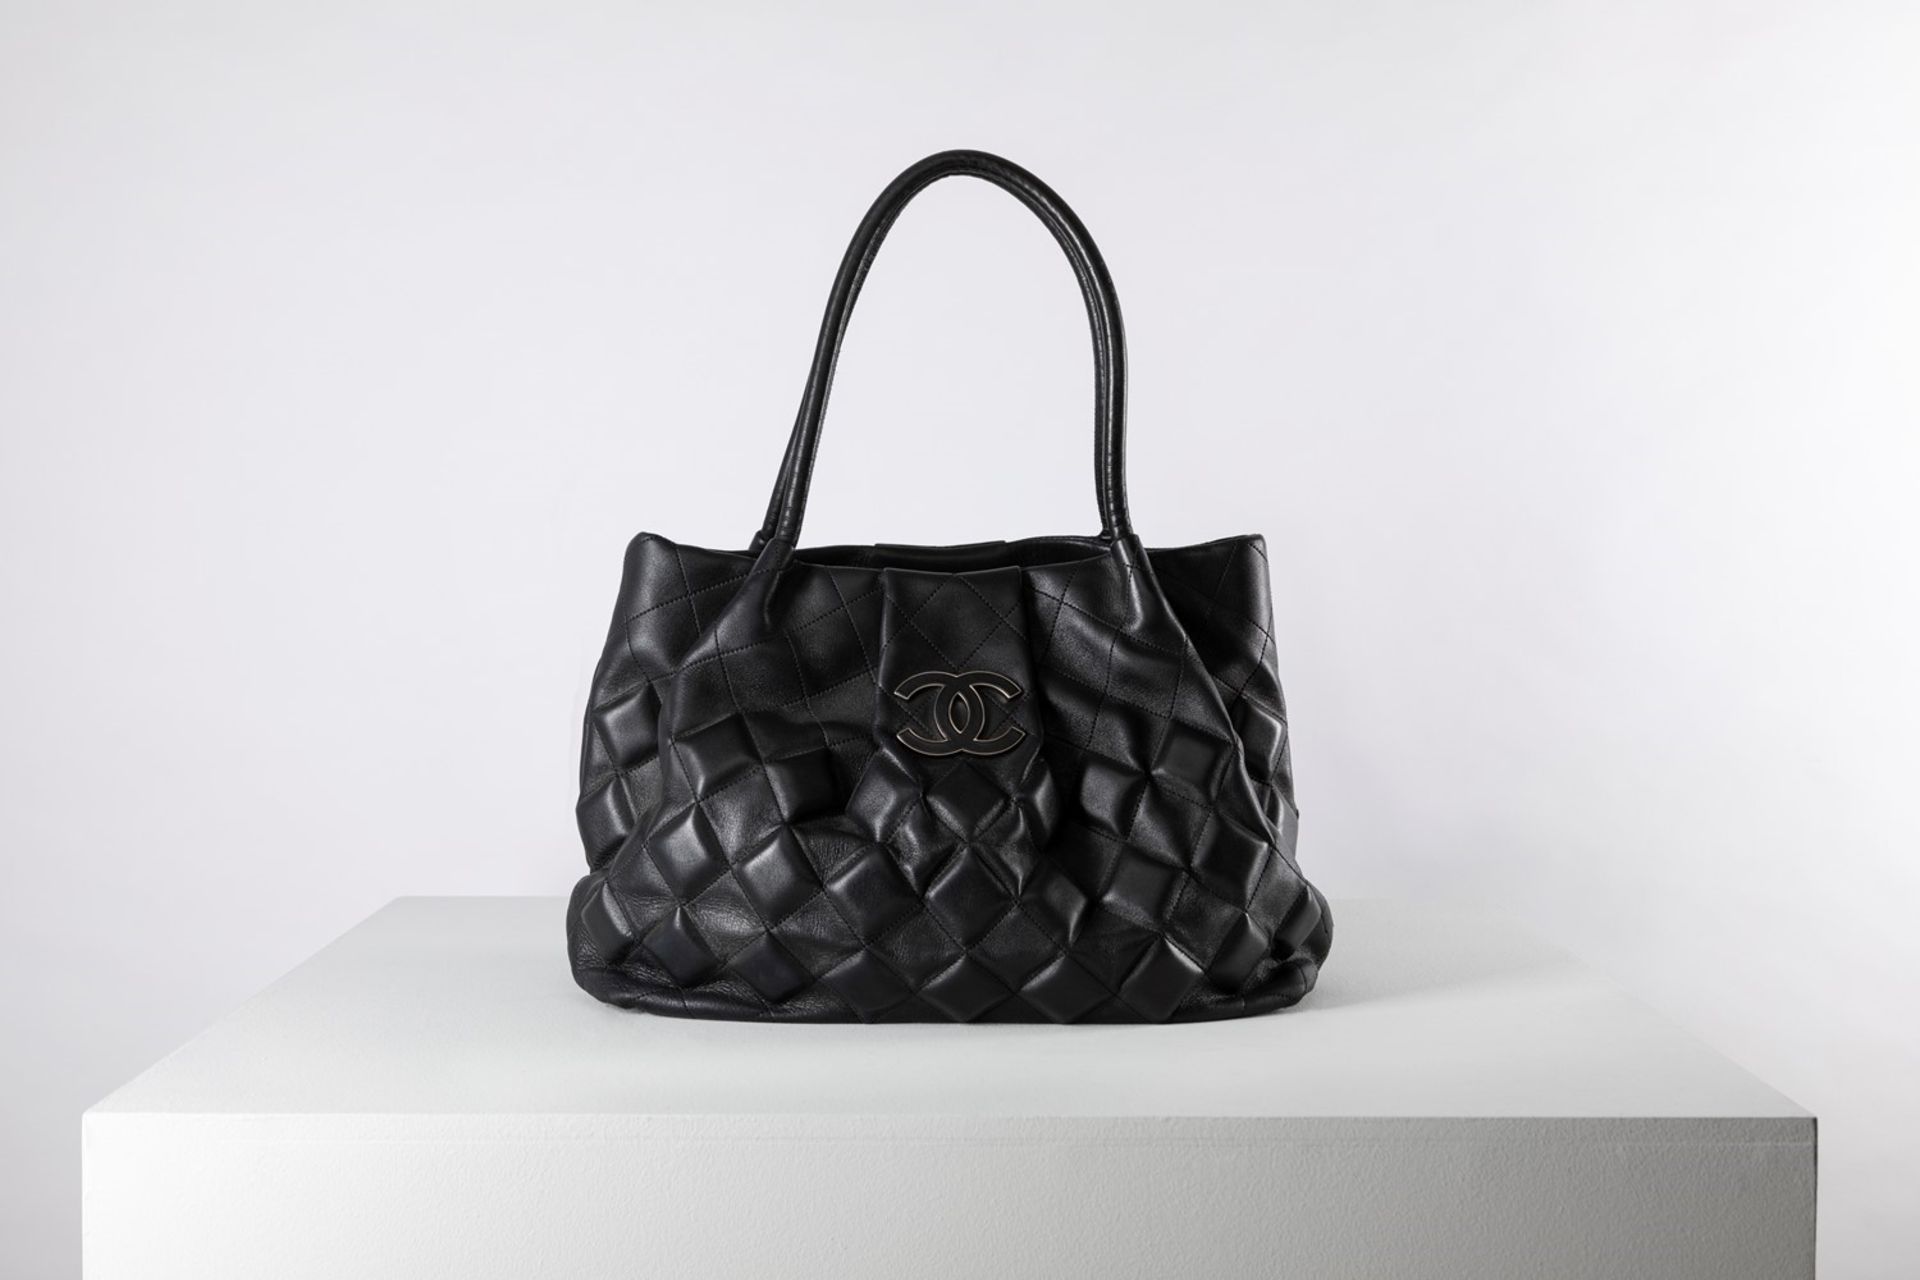 Chanel - Big Bag - Big Bag - Black quilted leather double handle bag, cm 40, with [...]